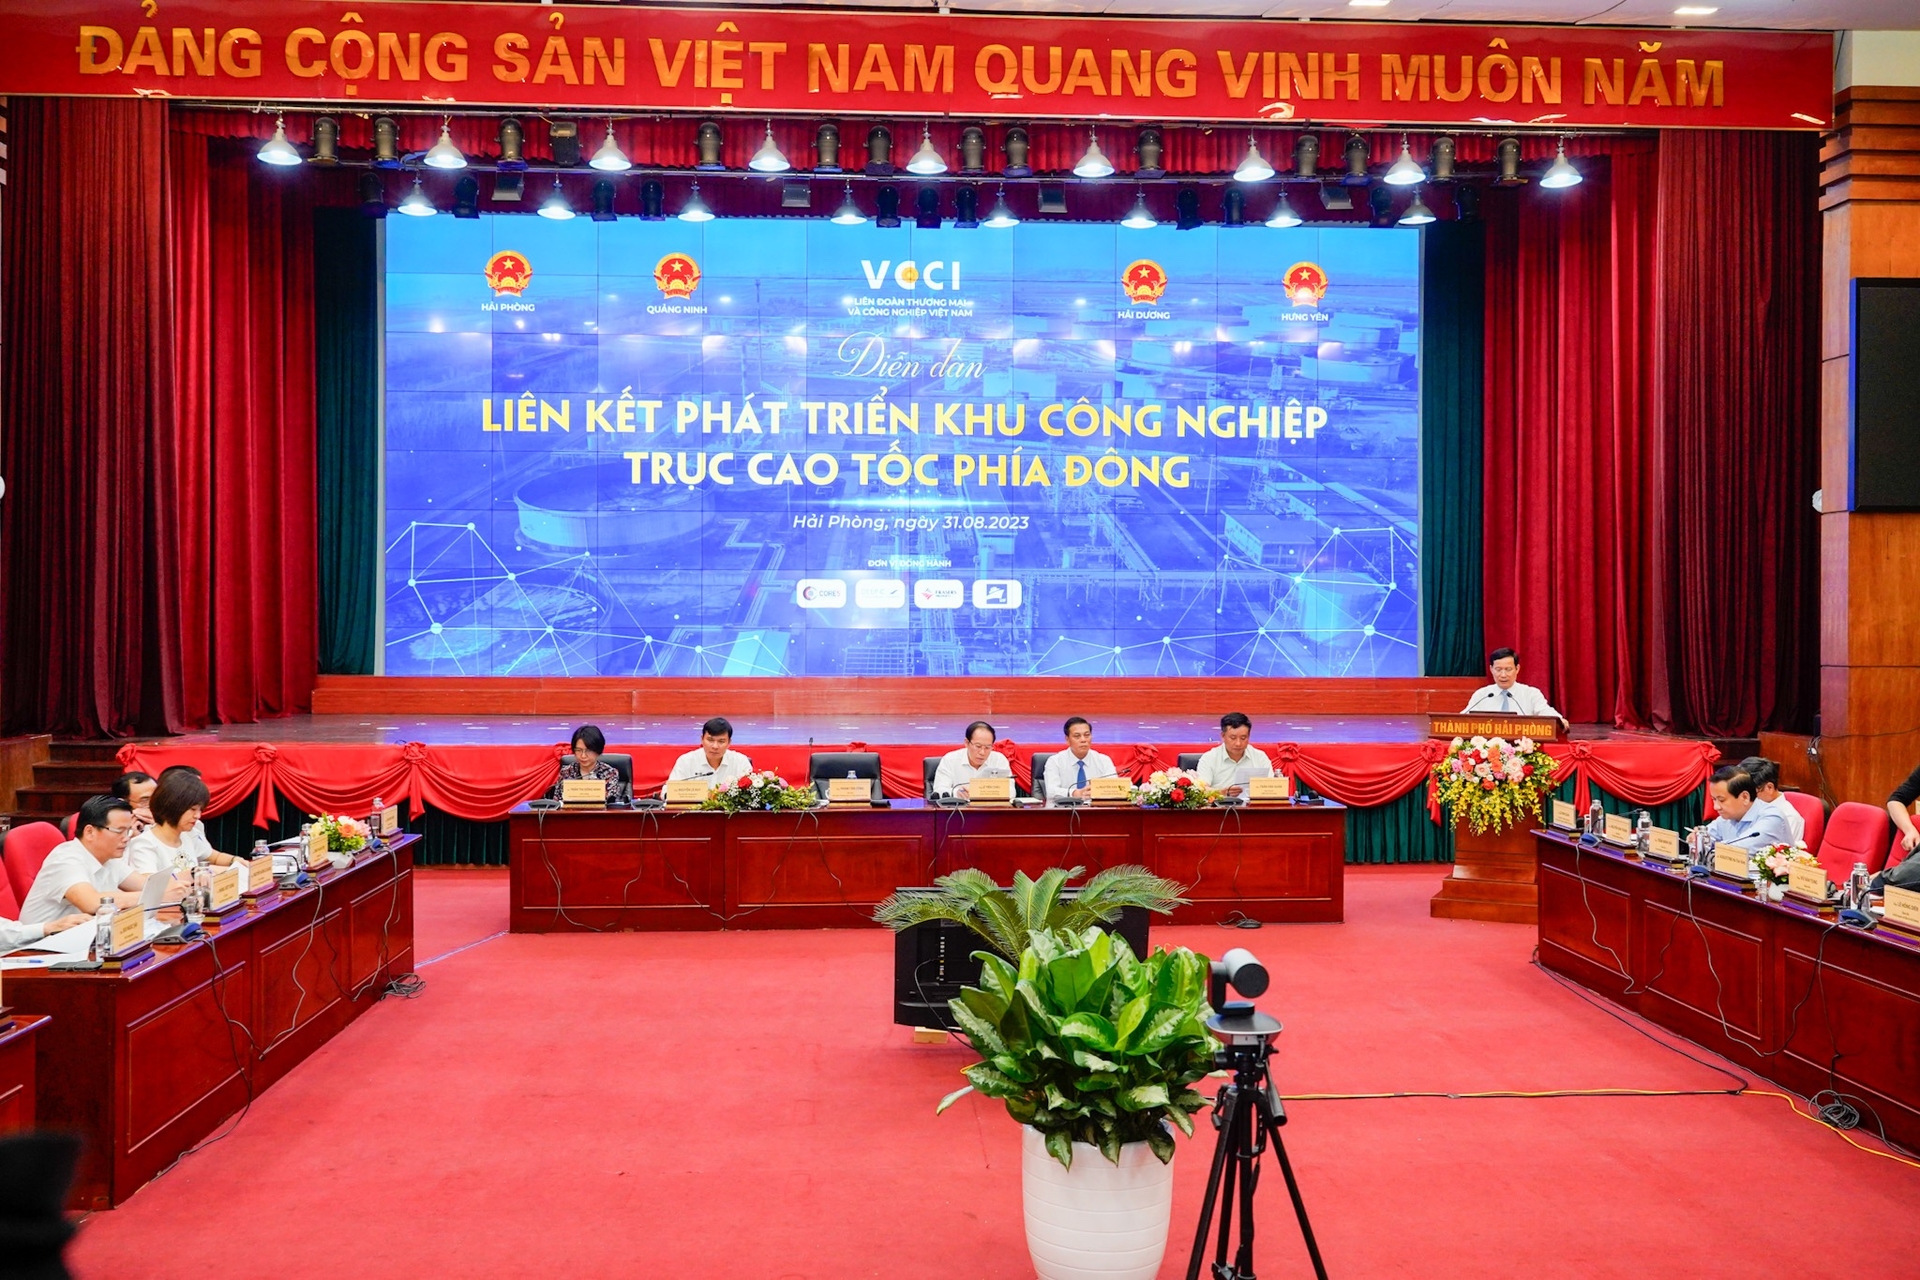 The forum was held at the convention centre of Hai Phong City. Photo: Dam Thanh.